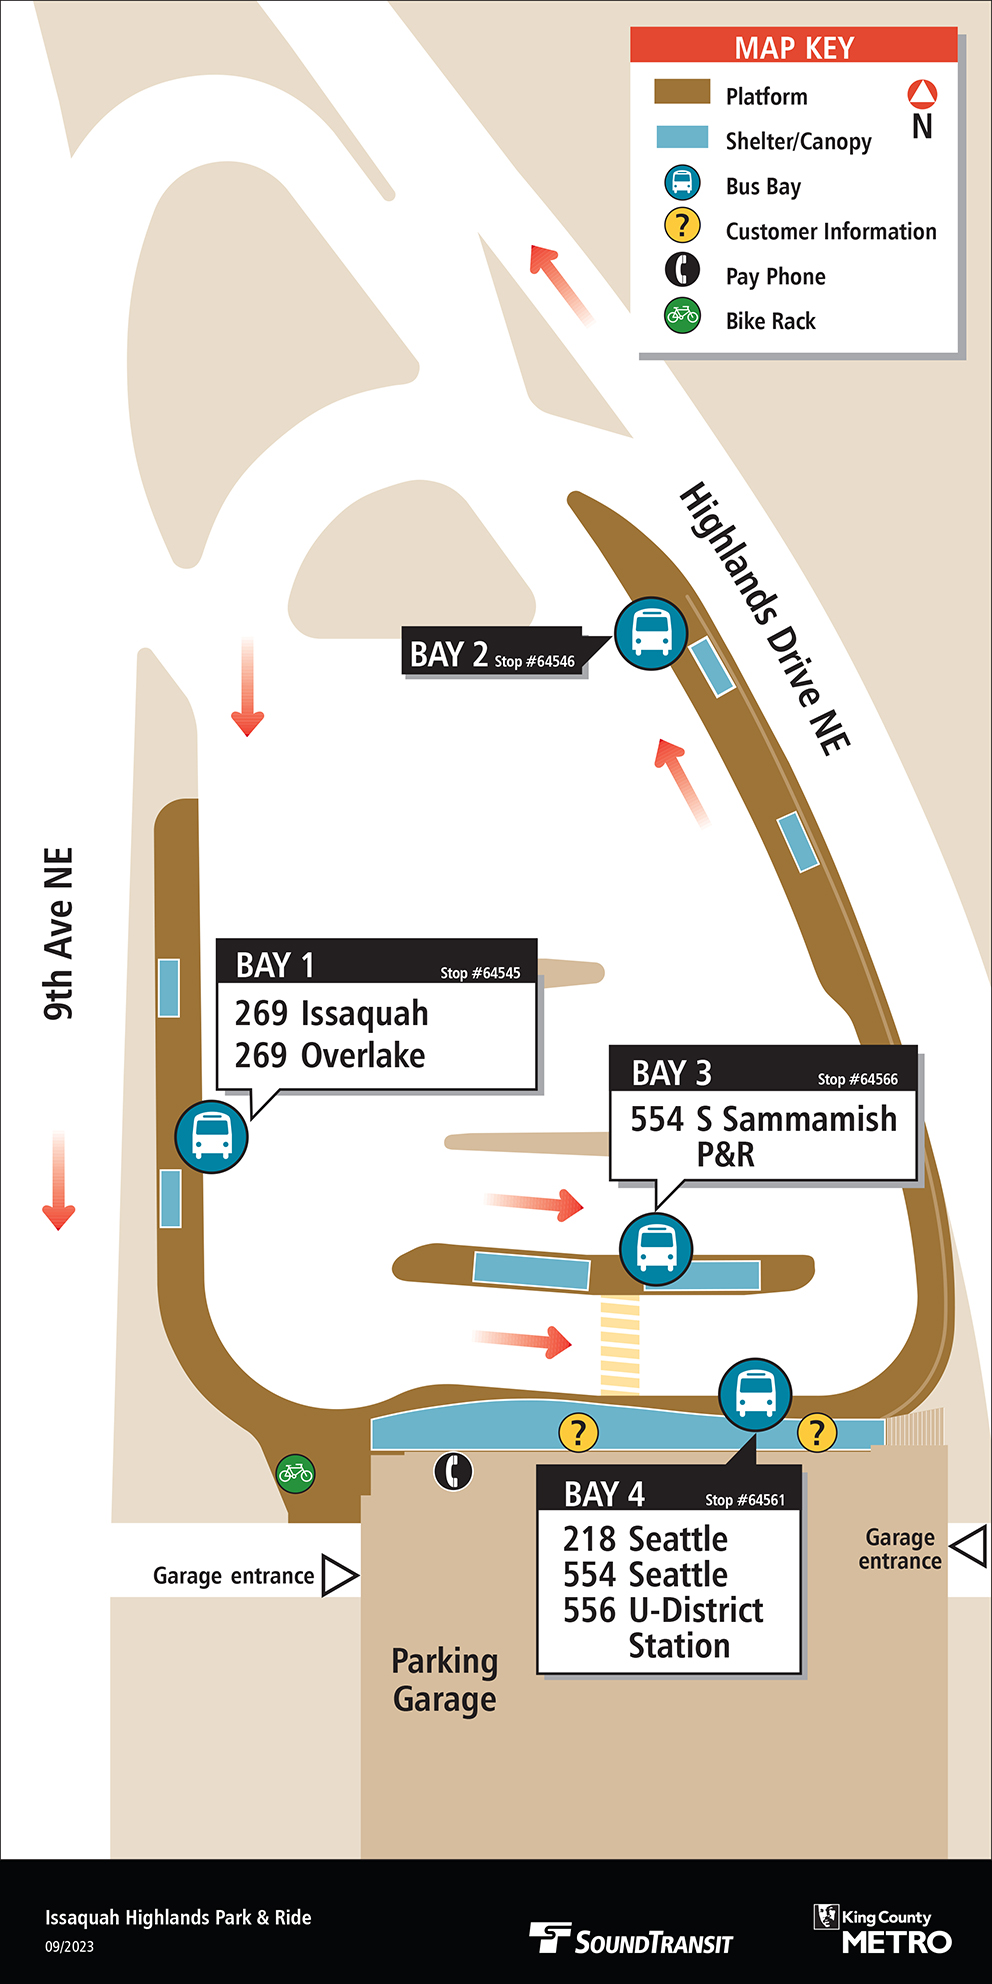 Map showing Issaquah Highlands Park & Ride boarding locations